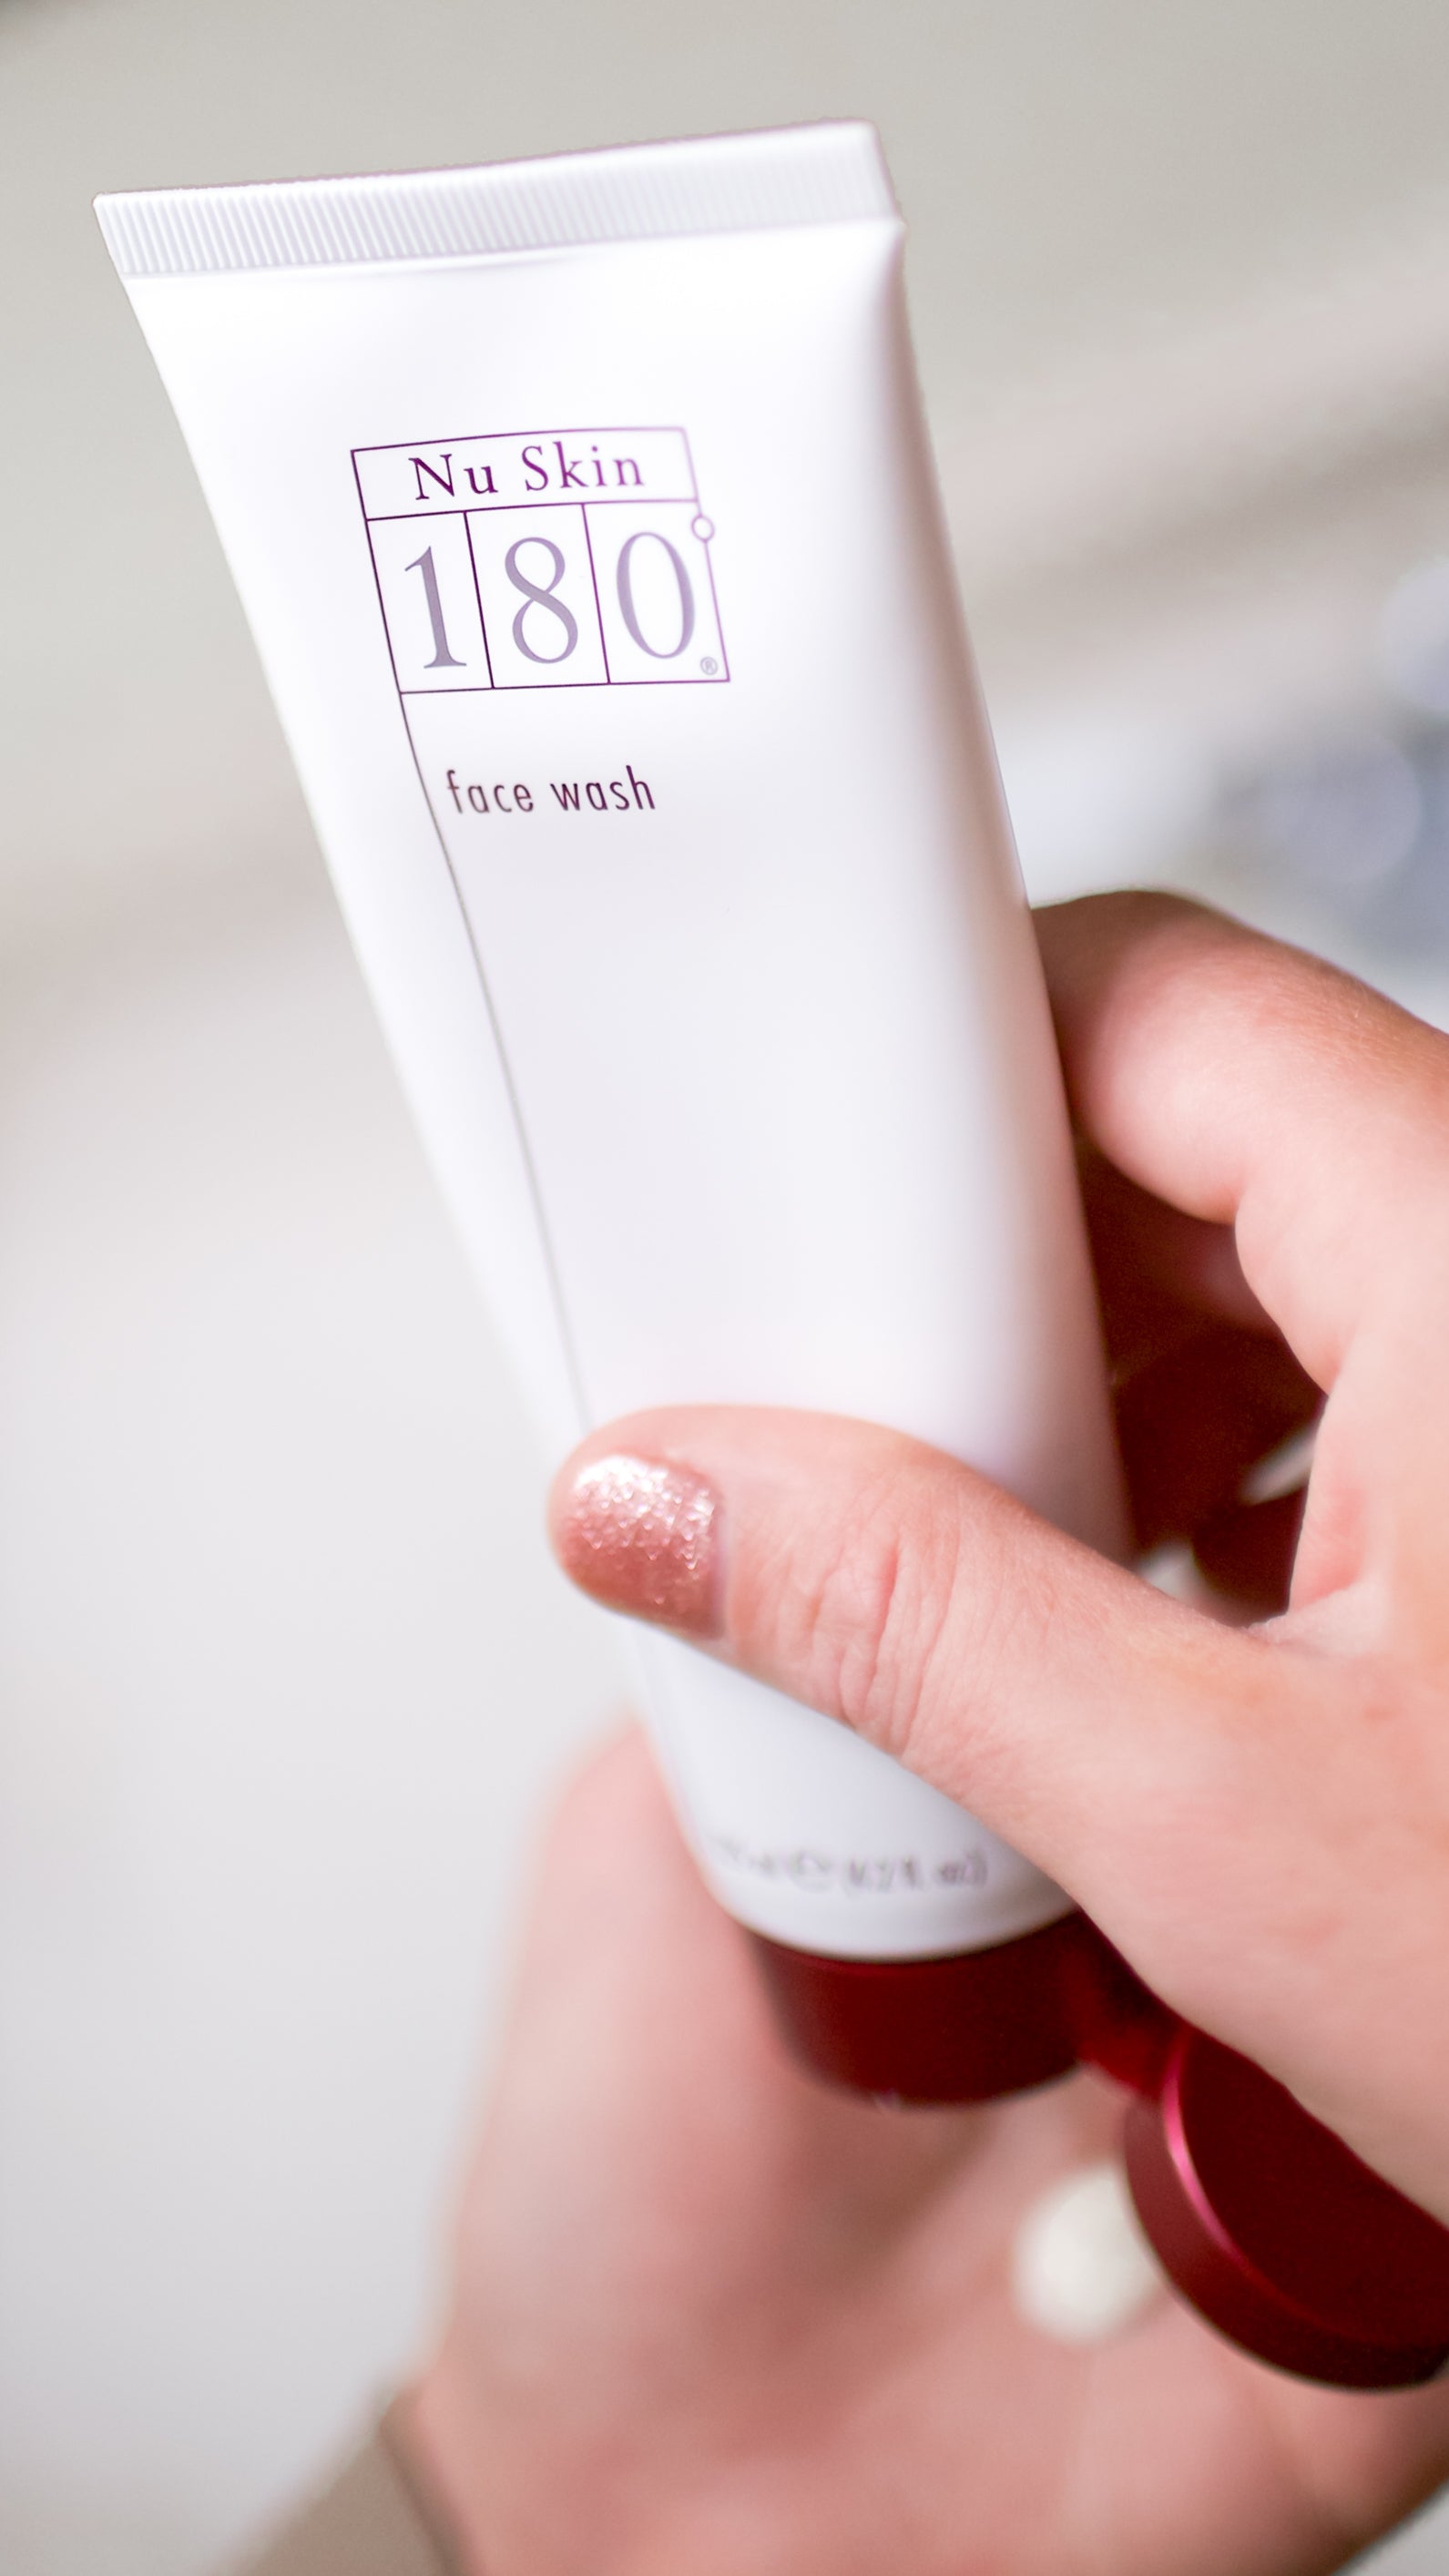 180° Face WashBuy 180° Face Wash
* Discount will apply at checkout. 
180° Face Wash contains 10 percent active, efficacious vitamin C, making it a potent tool against multiple sig180° Face Wash